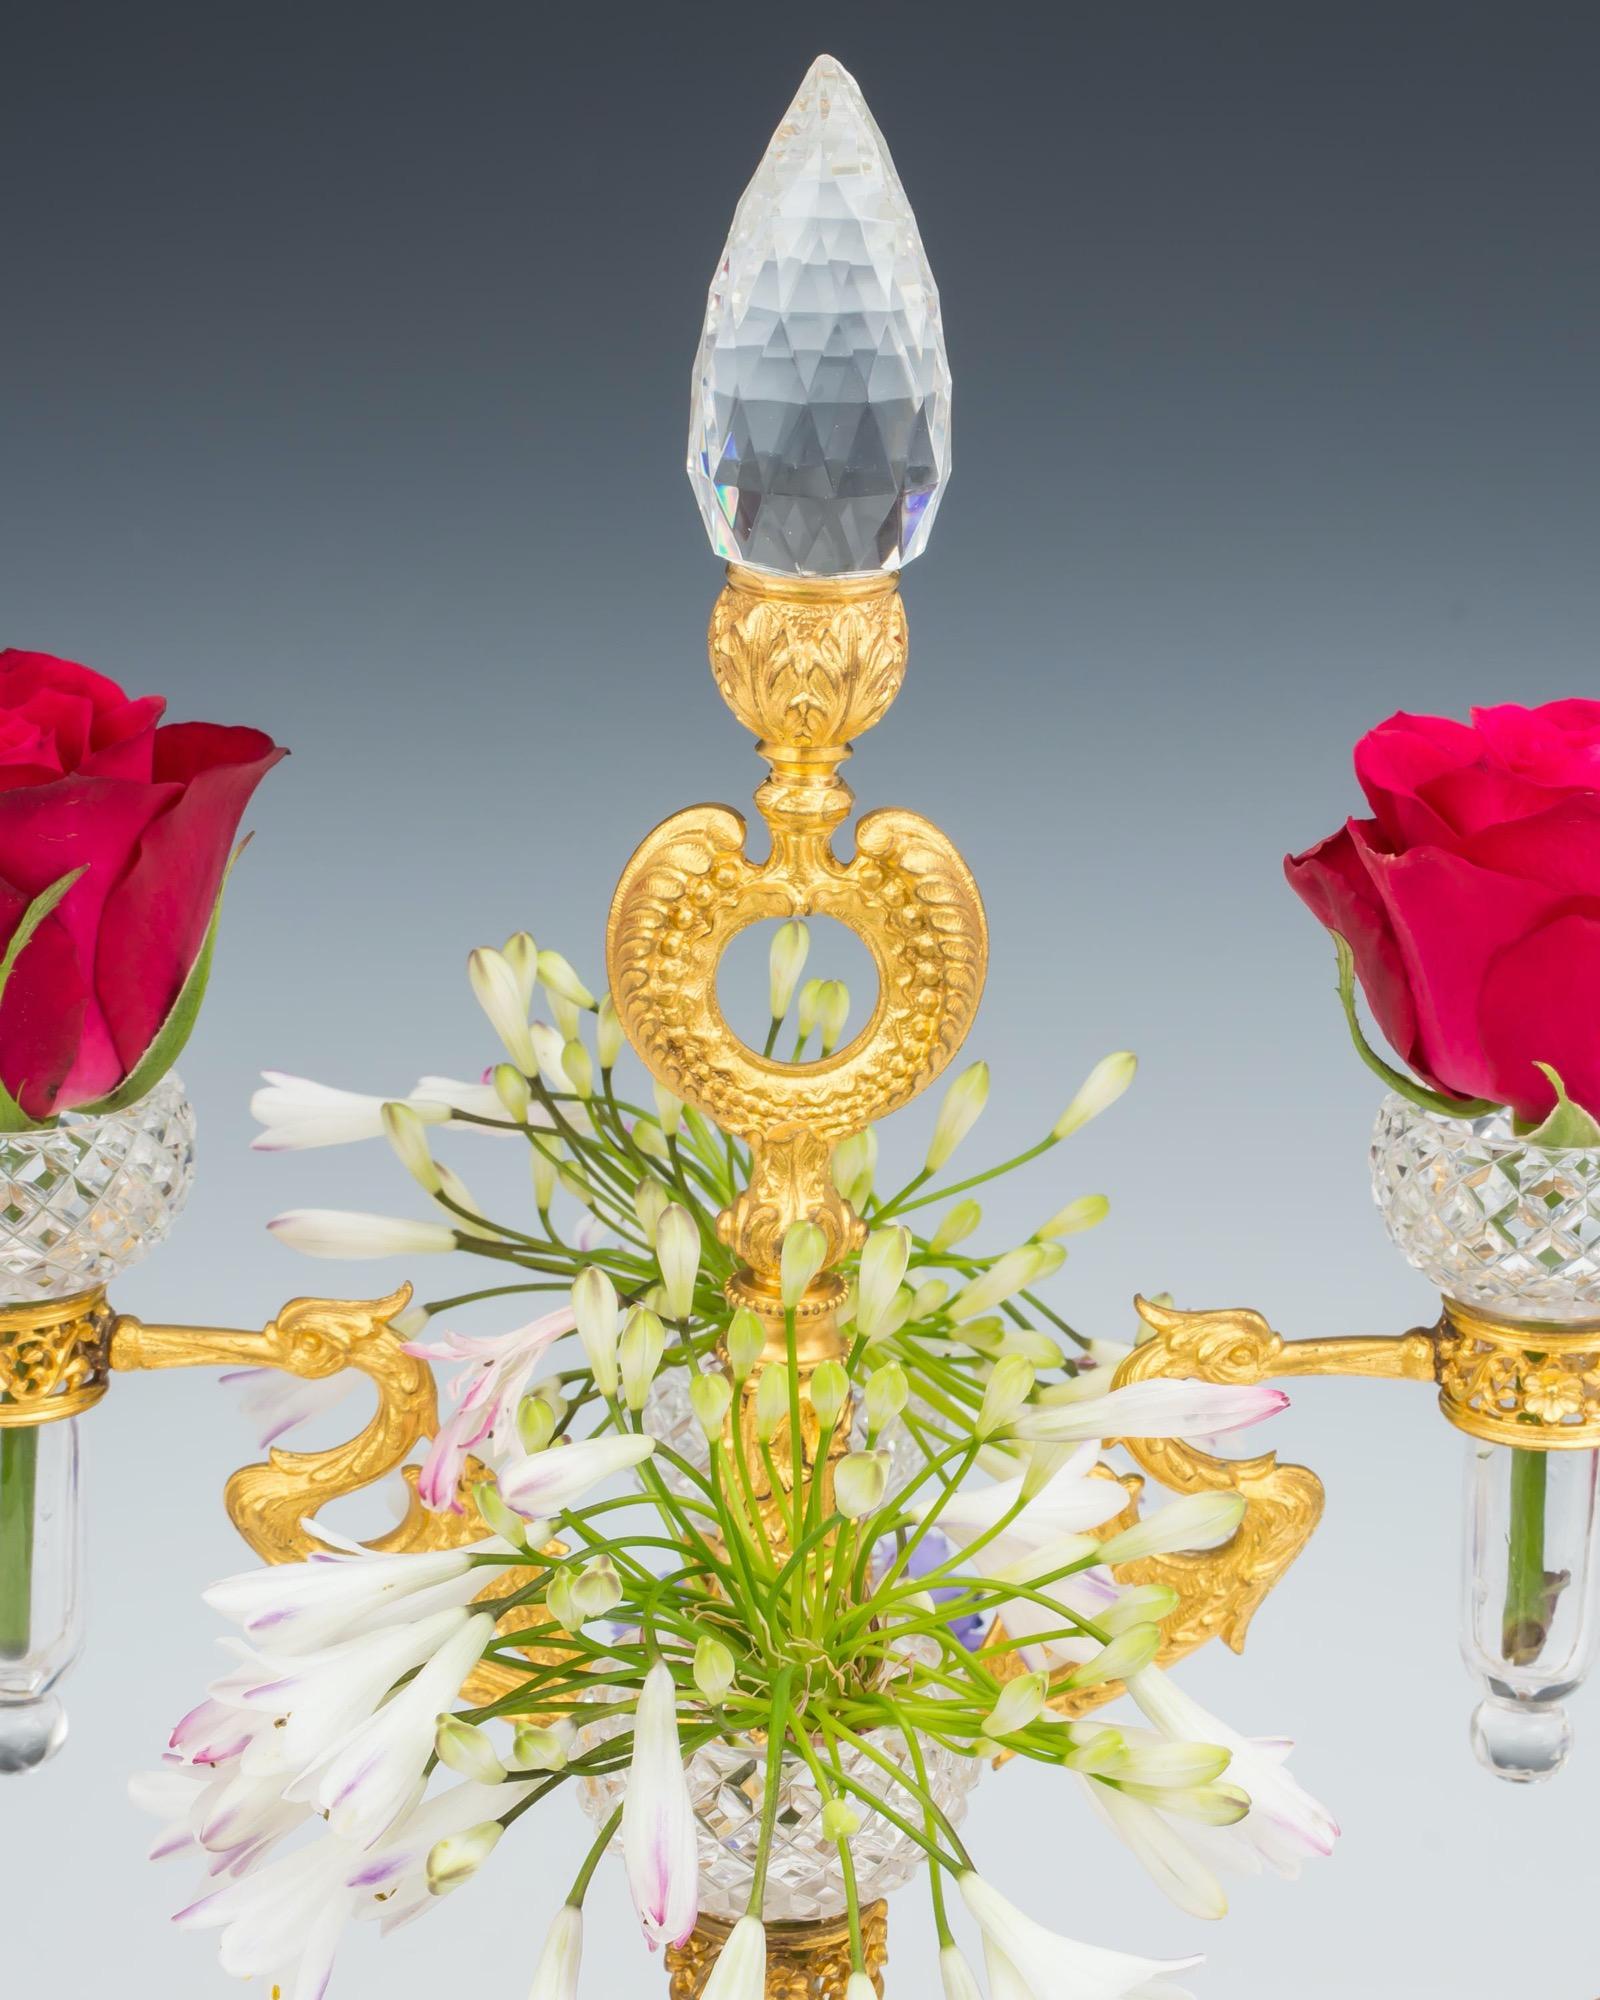 Mid-19th Century Unusual Ormolu Mounted & Cut Glass Flower Epergne by F&C Osler For Sale